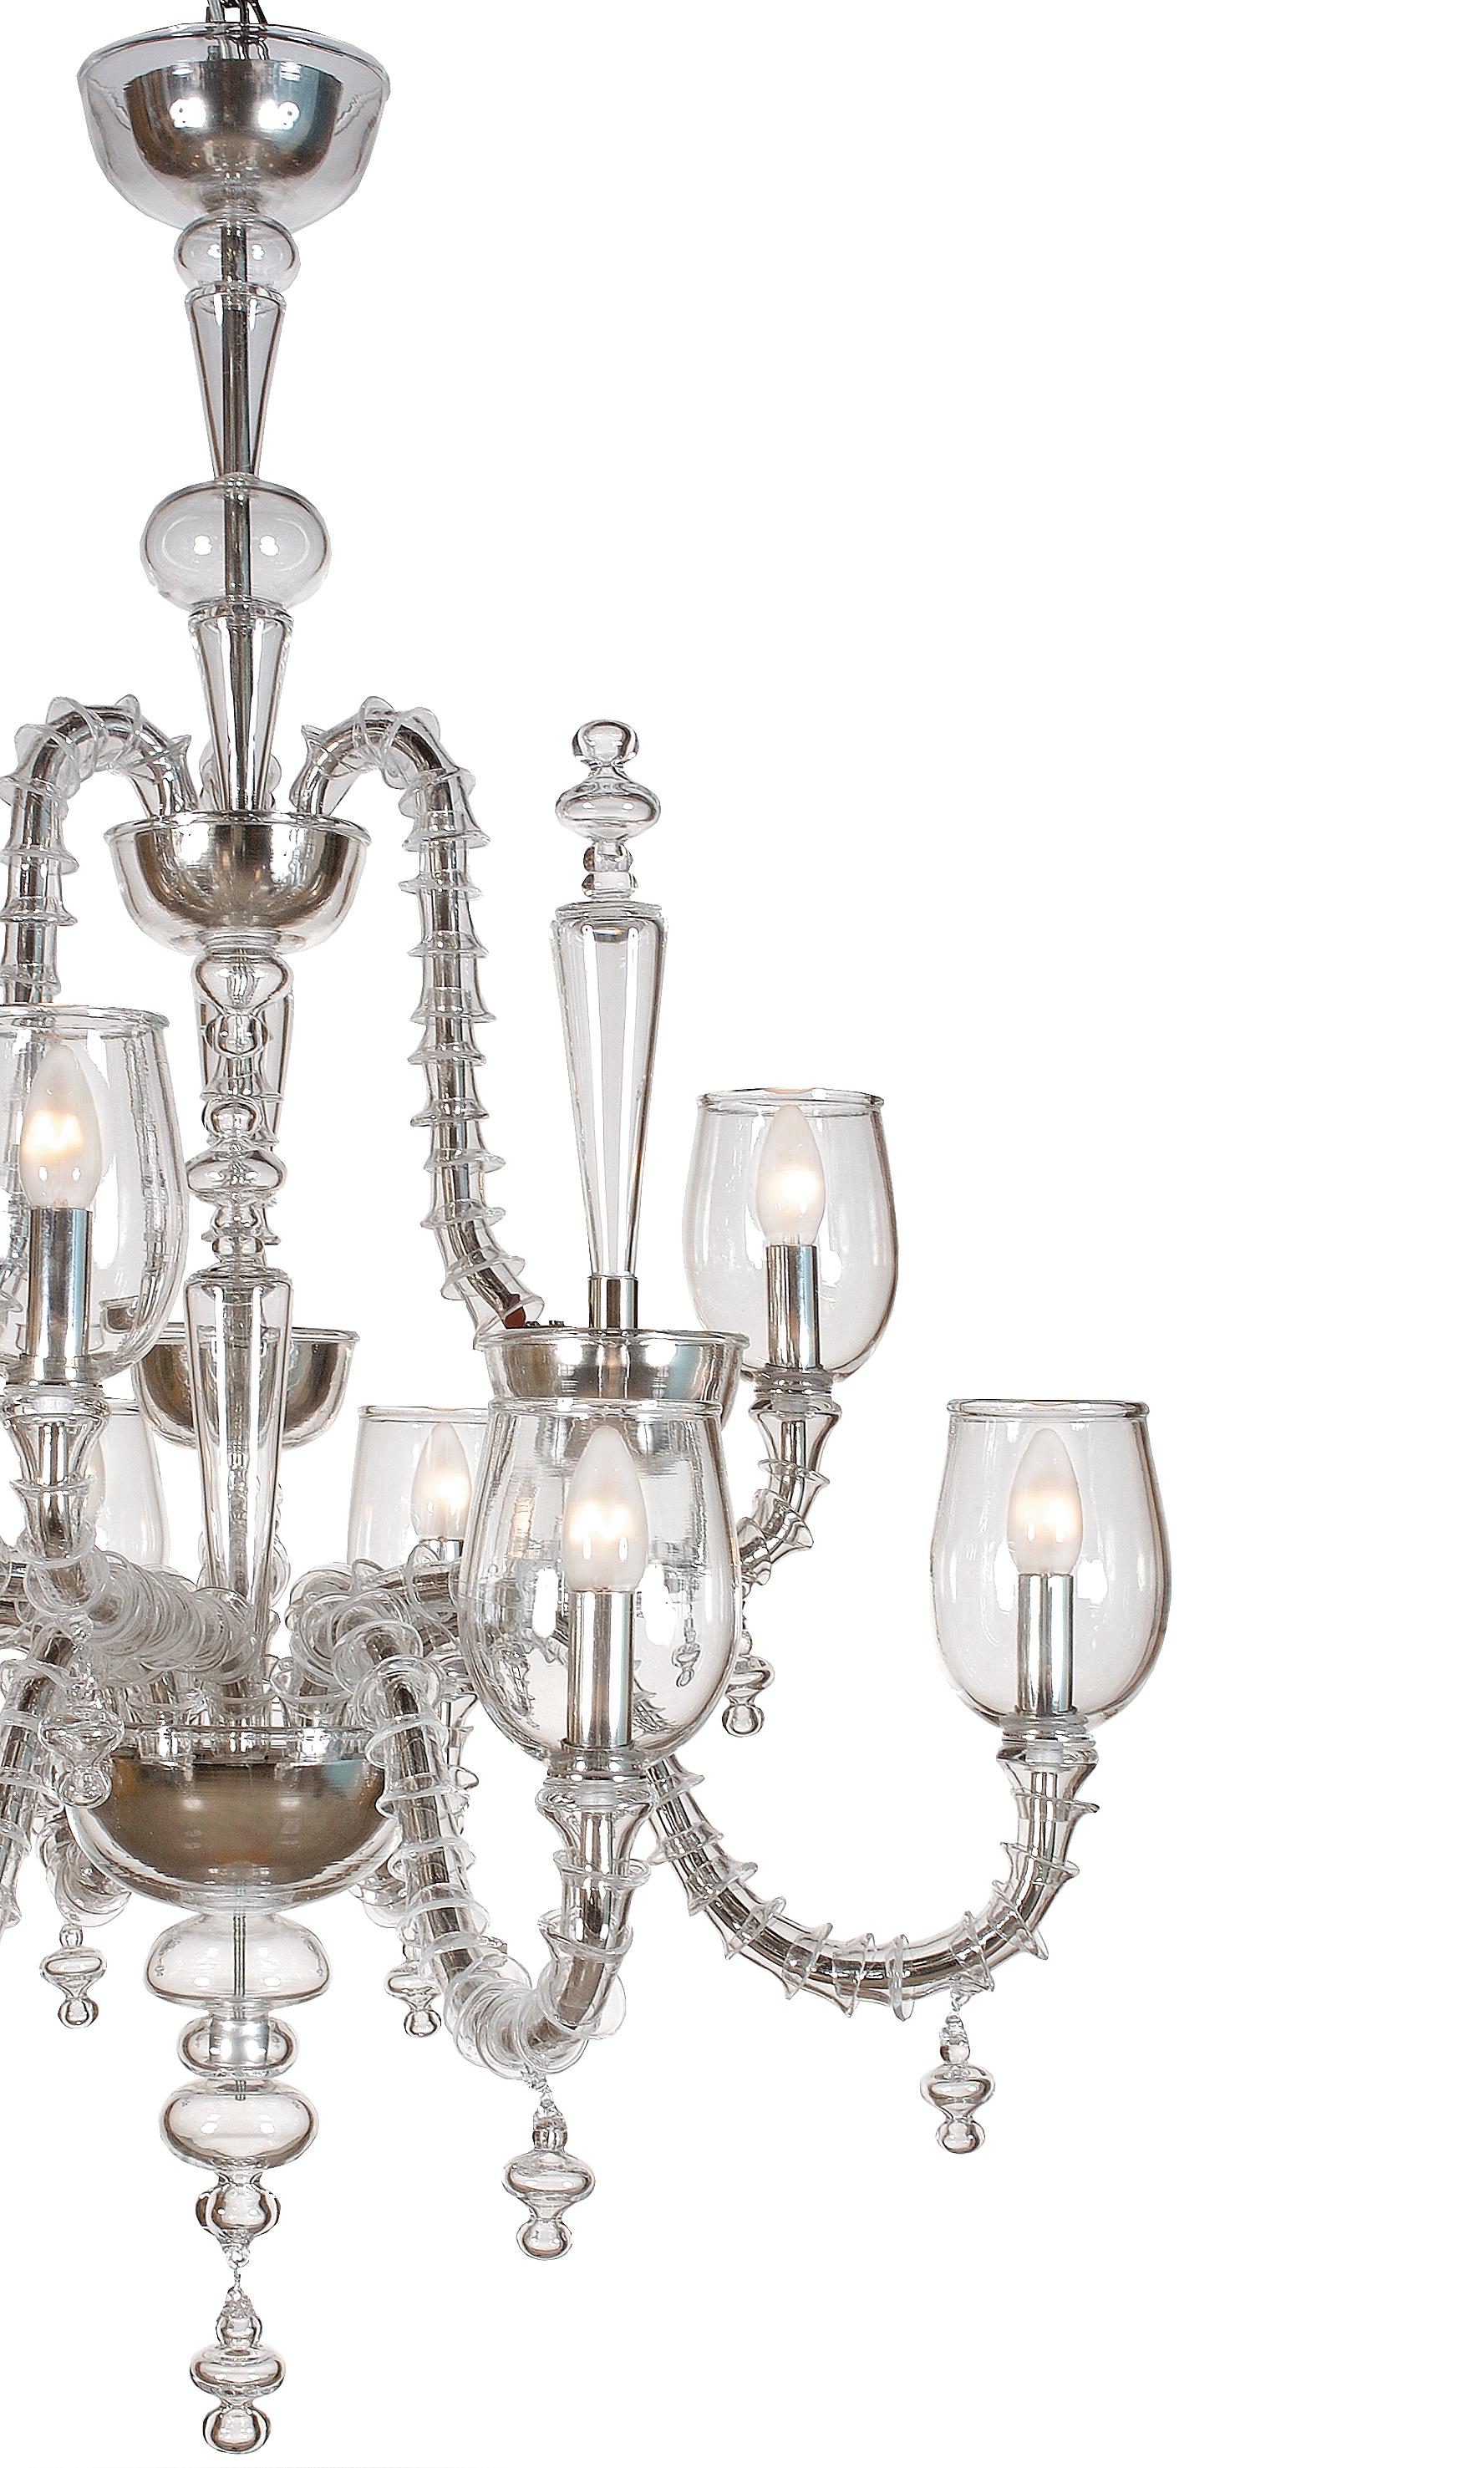 Discover the timeless elegance of Rezzonico style chandeliers, one of the oldest and most beloved chandelier designs made in Murano, here in a modern transparent version. The peculiarity of this style is its exquisite composition, with each arm made